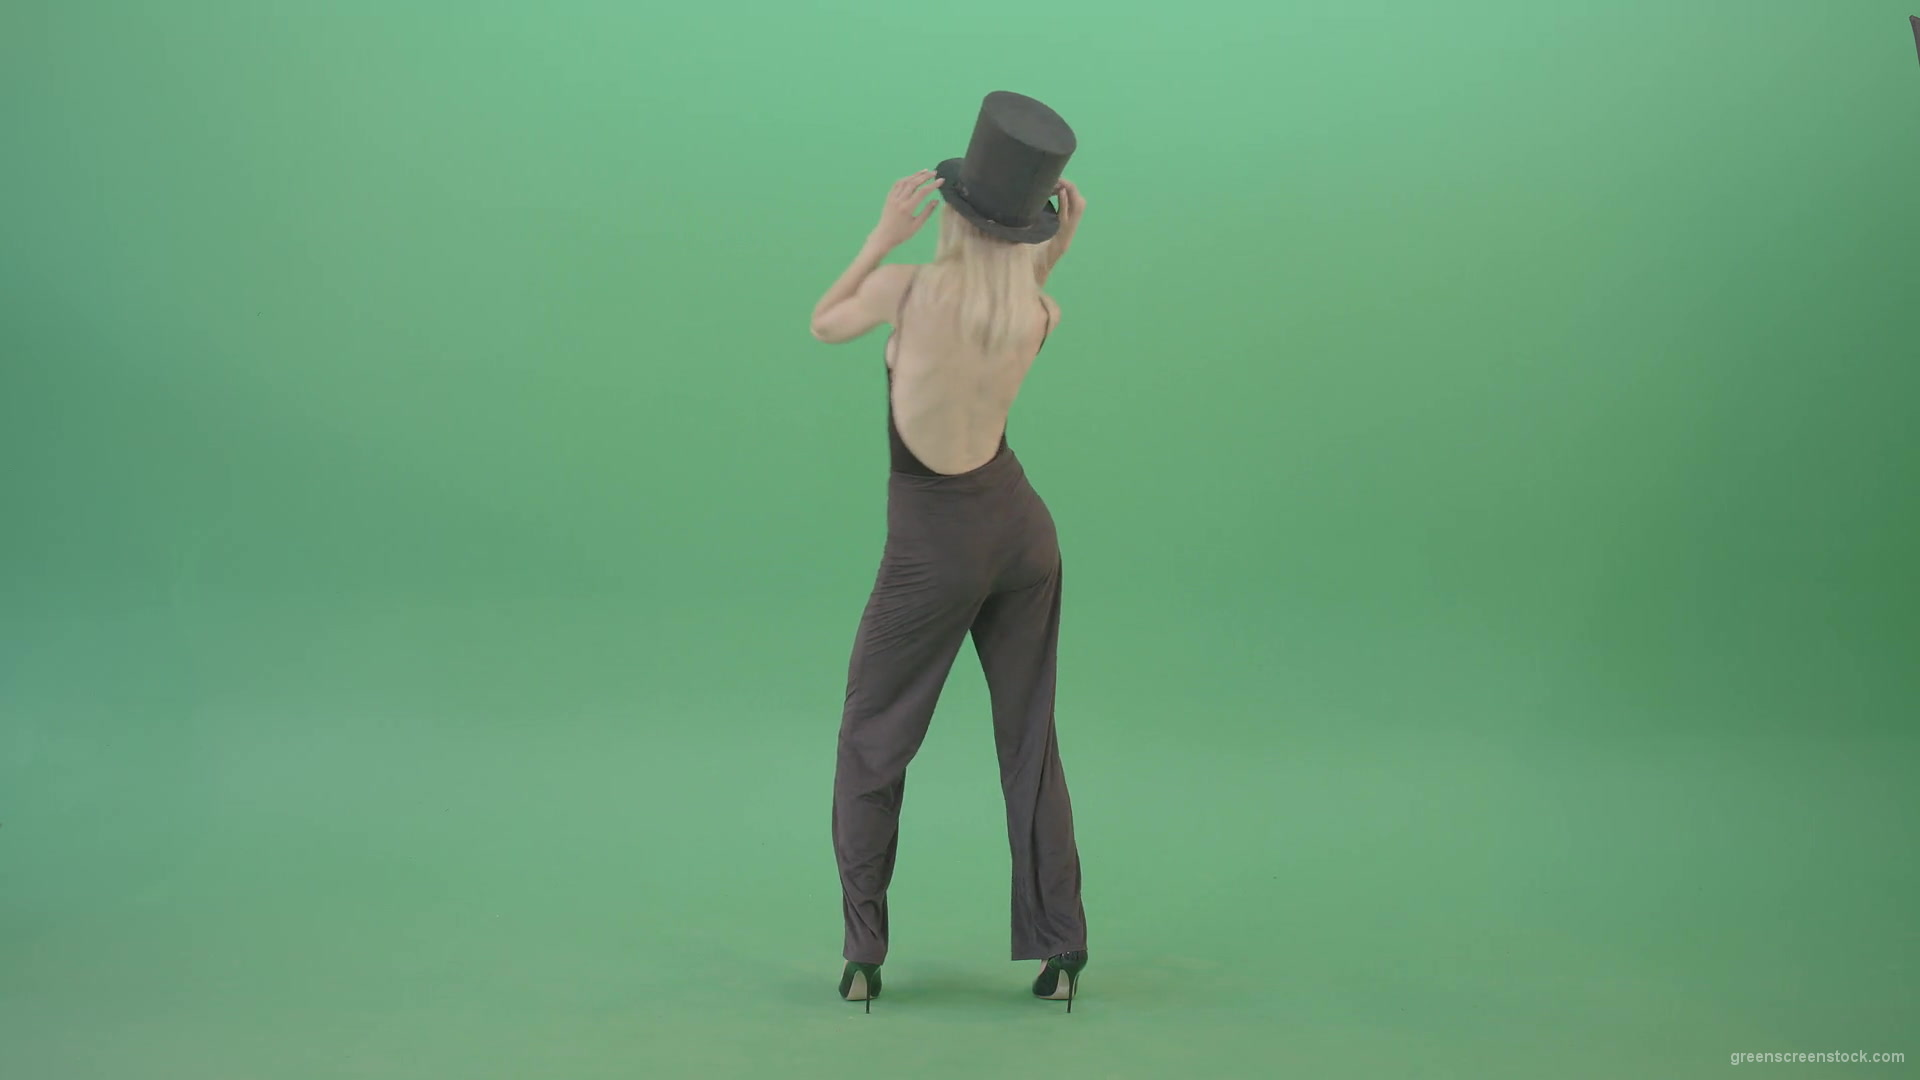 Covid-Mask-Girl-in-Black-cylinder-Hat-dancing-in-front-and-back-side-view-isolated-on-green-screen-Video-Footage-1920_008 Green Screen Stock